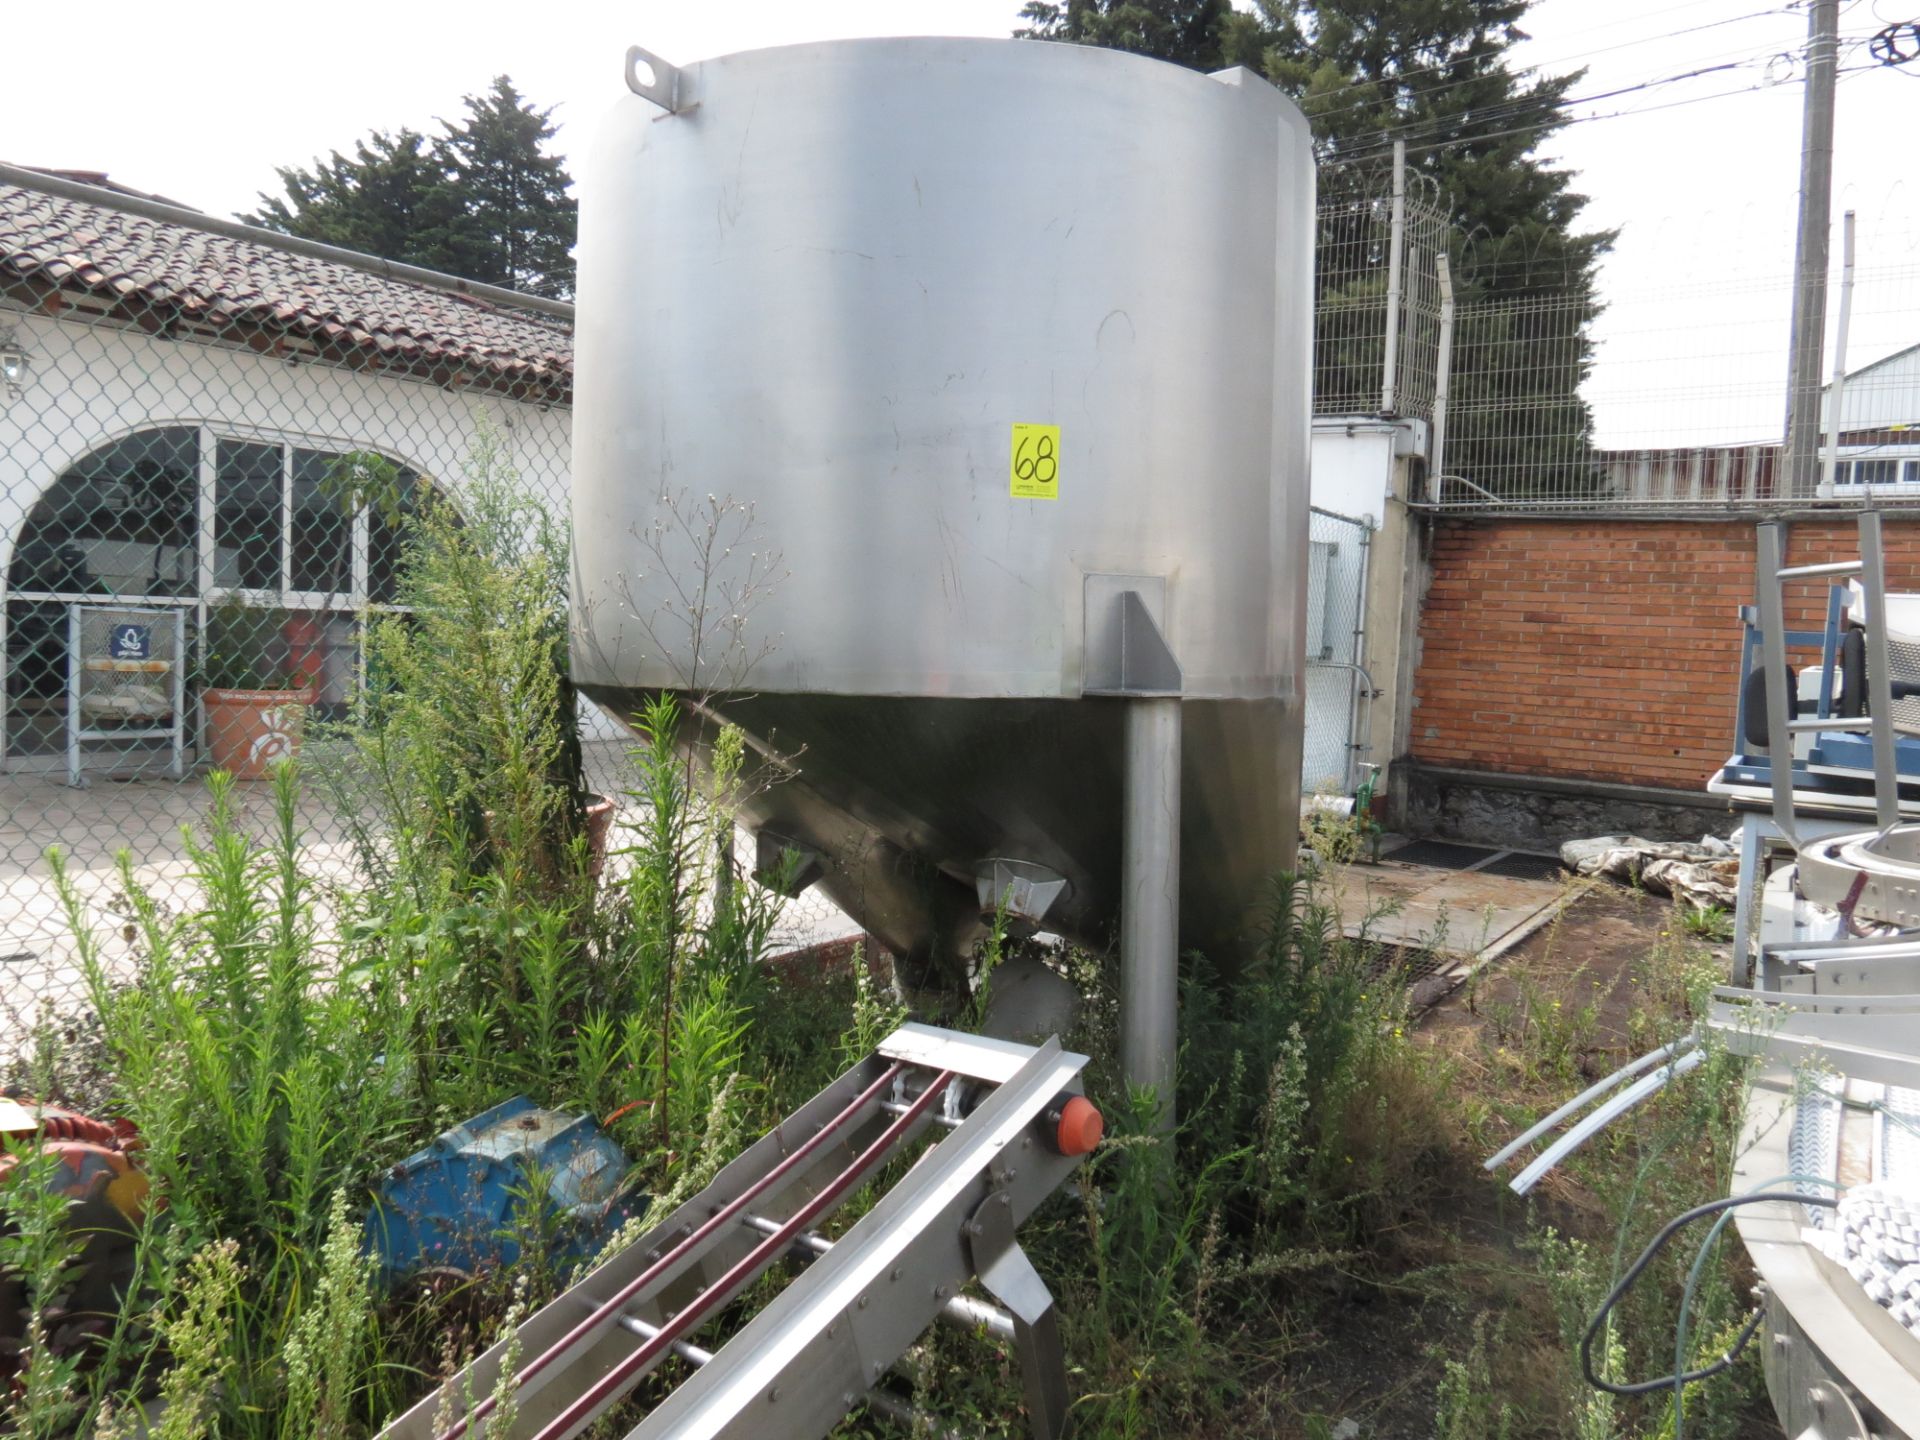 Stainless Steel Tank of 1.93 m in diameter, Includes Strong Parts conveyor belt. - Image 2 of 8